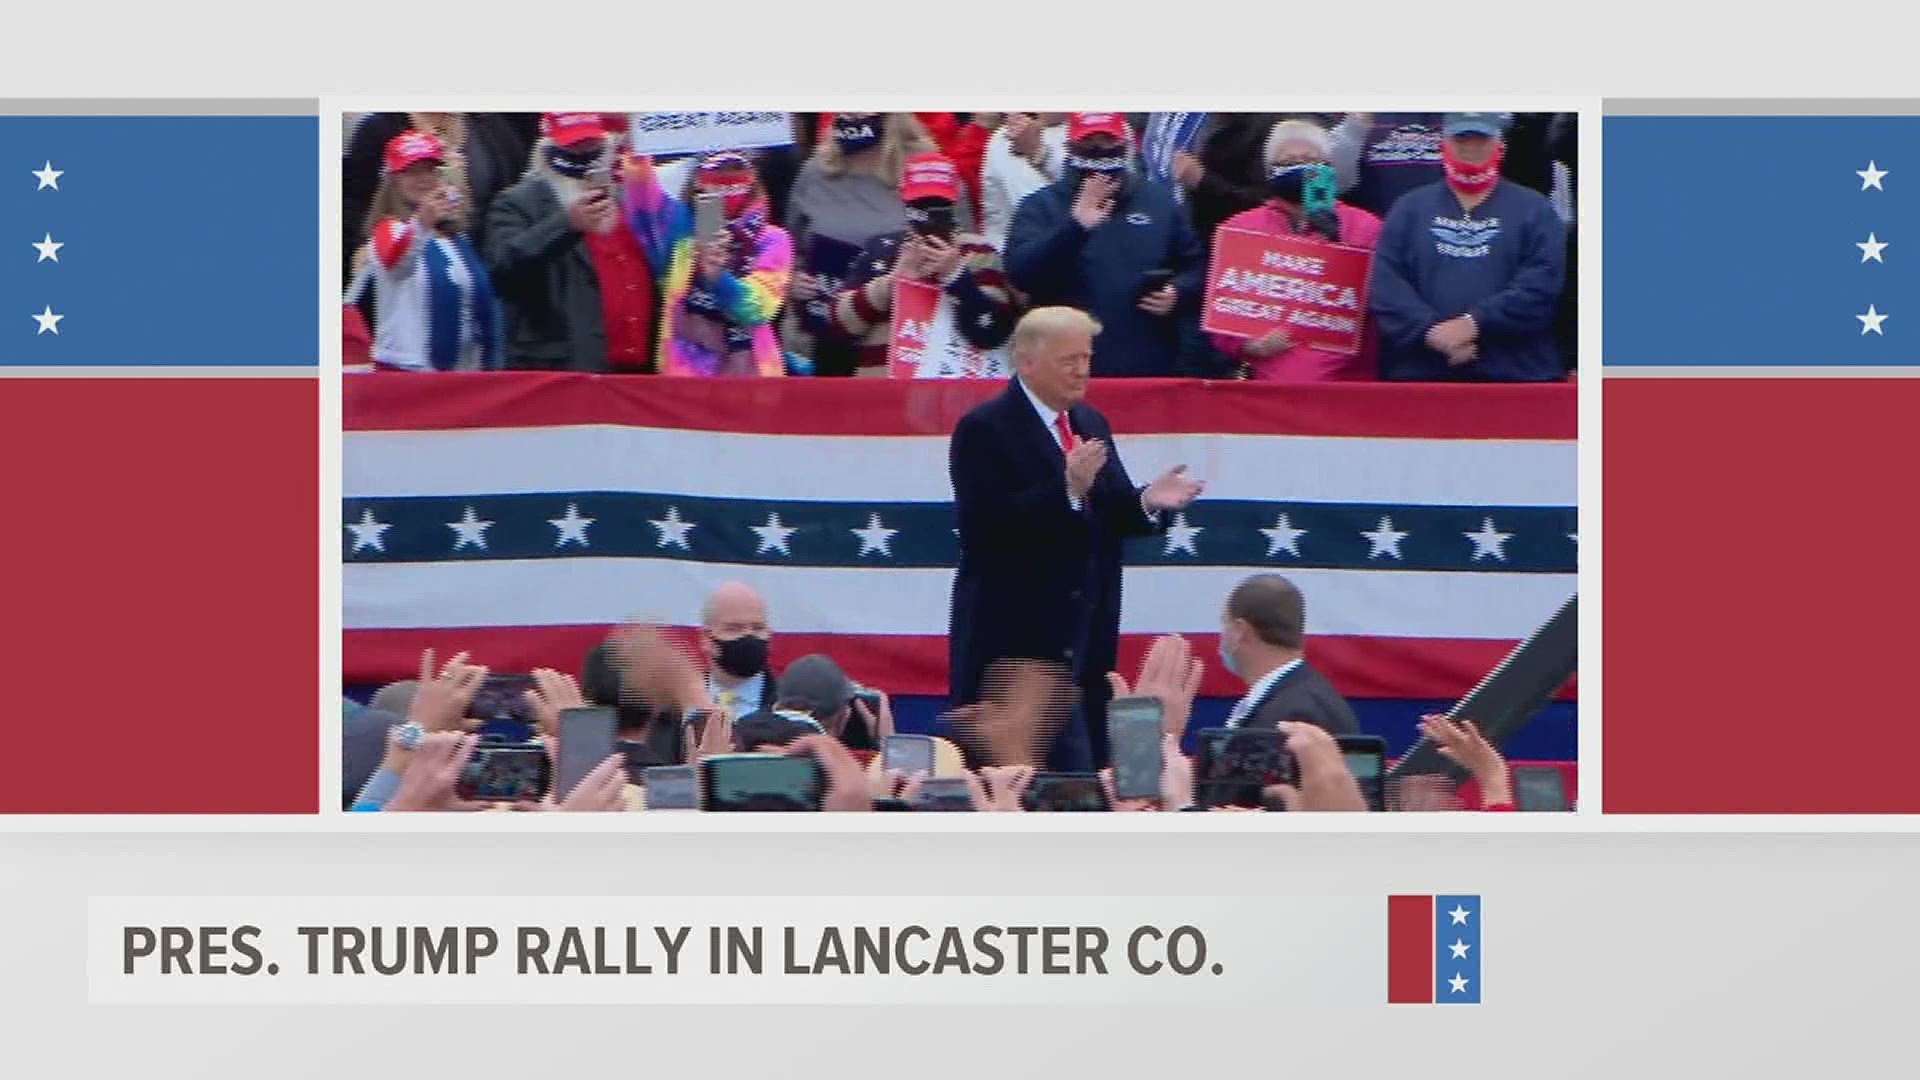 President Trump hosted a 'Make America Great Again' event at the Lancaster Airport located at 530 Airport Road in Lititz.